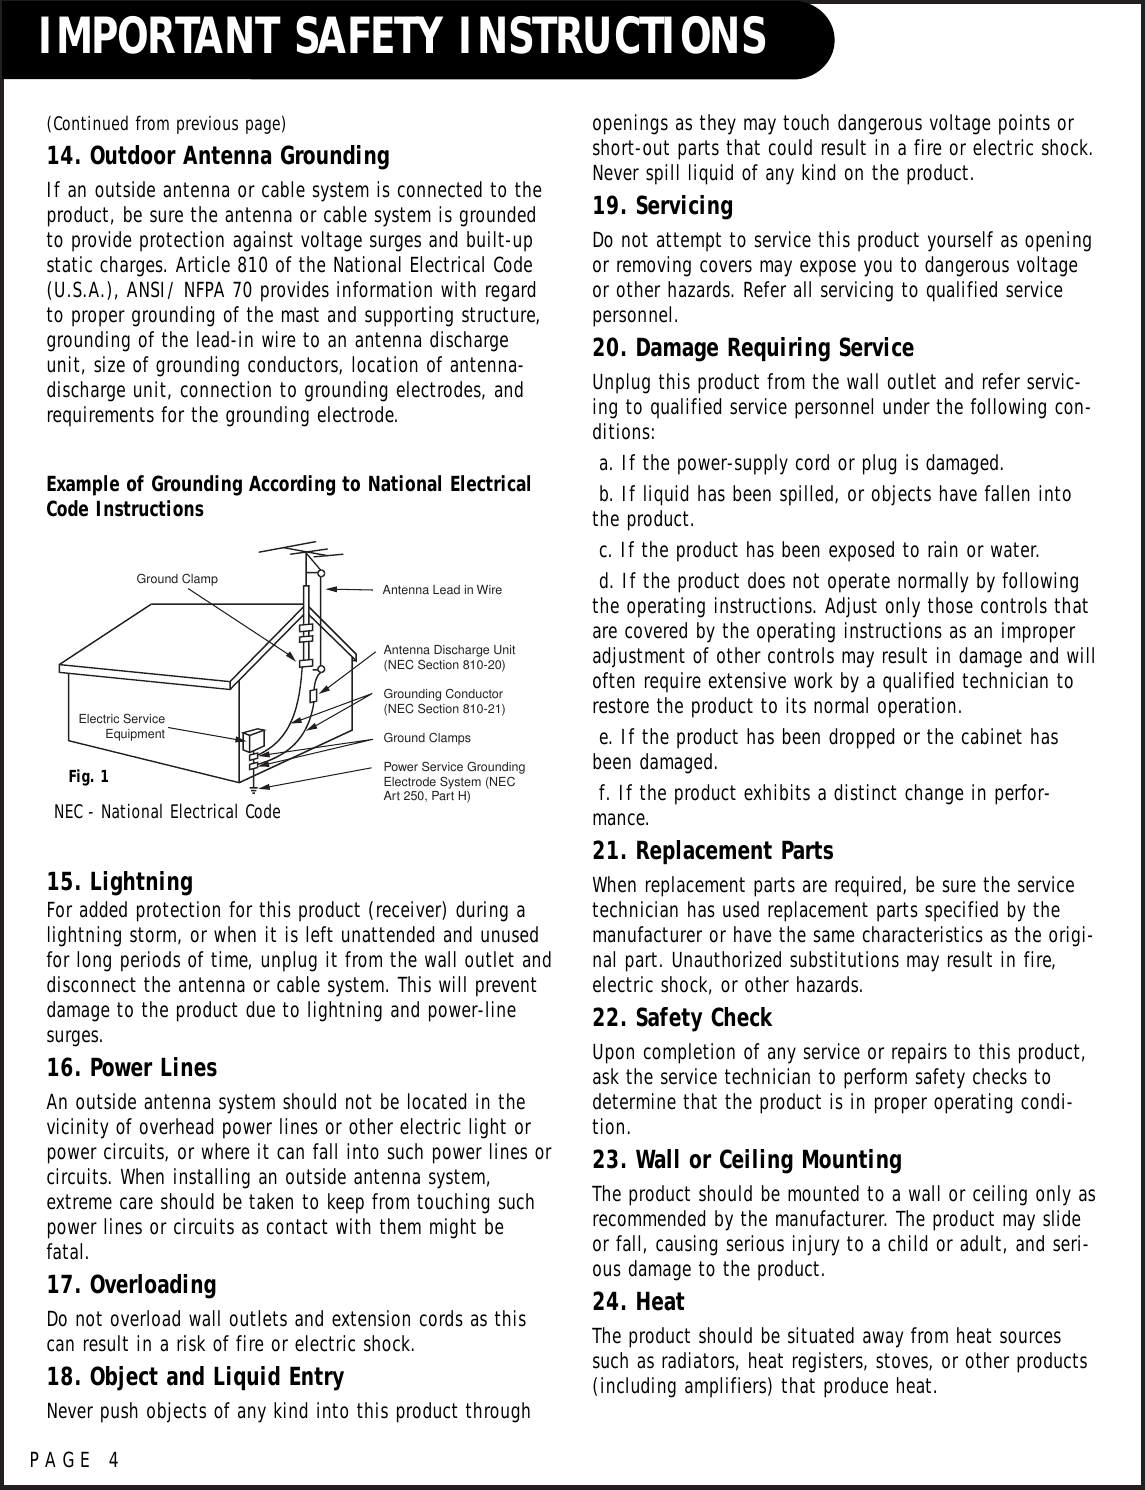 PAGE 4(Continued from previous page)14. Outdoor Antenna GroundingIf an outside antenna or cable system is connected to theproduct, be sure the antenna or cable system is groundedto provide protection against voltage surges and built-upstatic charges. Article 810 of the National Electrical Code(U.S.A.), ANSI/ NFPA 70 provides information with regardto proper grounding of the mast and supporting structure,grounding of the lead-in wire to an antenna dischargeunit, size of grounding conductors, location of antenna-discharge unit, connection to grounding electrodes, andrequirements for the grounding electrode.15. LightningFor added protection for this product (receiver) during alightning storm, or when it is left unattended and unusedfor long periods of time, unplug it from the wall outlet anddisconnect the antenna or cable system. This will preventdamage to the product due to lightning and power-linesurges.16. Power LinesAn outside antenna system should not be located in thevicinity of overhead power lines or other electric light orpower circuits, or where it can fall into such power lines orcircuits. When installing an outside antenna system,extreme care should be taken to keep from touching suchpower lines or circuits as contact with them might befatal.17. OverloadingDo not overload wall outlets and extension cords as thiscan result in a risk of fire or electric shock.18. Object and Liquid EntryNever push objects of any kind into this product throughopenings as they may touch dangerous voltage points orshort-out parts that could result in a fire or electric shock.Never spill liquid of any kind on the product.19. ServicingDo not attempt to service this product yourself as openingor removing covers may expose you to dangerous voltageor other hazards. Refer all servicing to qualified servicepersonnel.20. Damage Requiring ServiceUnplug this product from the wall outlet and refer servic-ing to qualified service personnel under the following con-ditions:a. If the power-supply cord or plug is damaged.b. If liquid has been spilled, or objects have fallen intothe product.c. If the product has been exposed to rain or water.d. If the product does not operate normally by followingthe operating instructions. Adjust only those controls thatare covered by the operating instructions as an improperadjustment of other controls may result in damage and willoften require extensive work by a qualified technician torestore the product to its normal operation.e. If the product has been dropped or the cabinet hasbeen damaged.f. If the product exhibits a distinct change in perfor-mance.21. Replacement PartsWhen replacement parts are required, be sure the servicetechnician has used replacement parts specified by themanufacturer or have the same characteristics as the origi-nal part. Unauthorized substitutions may result in fire,electric shock, or other hazards.22. Safety CheckUpon completion of any service or repairs to this product,ask the service technician to perform safety checks todetermine that the product is in proper operating condi-tion.23. Wall or Ceiling MountingThe product should be mounted to a wall or ceiling only asrecommended by the manufacturer. The product may slideor fall, causing serious injury to a child or adult, and seri-ous damage to the product.24. HeatThe product should be situated away from heat sourcessuch as radiators, heat registers, stoves, or other products(including amplifiers) that produce heat.Antenna Lead in WireAntenna Discharge Unit(NEC Section 810-20)Grounding Conductor(NEC Section 810-21)Ground ClampsPower Service GroundingElectrode System (NECArt 250, Part H)Ground ClampElectric ServiceEquipmentExample of Grounding According to National ElectricalCode InstructionsFig. 1NEC - National Electrical CodeIMPORTANT SAFETY INSTRUCTIONS